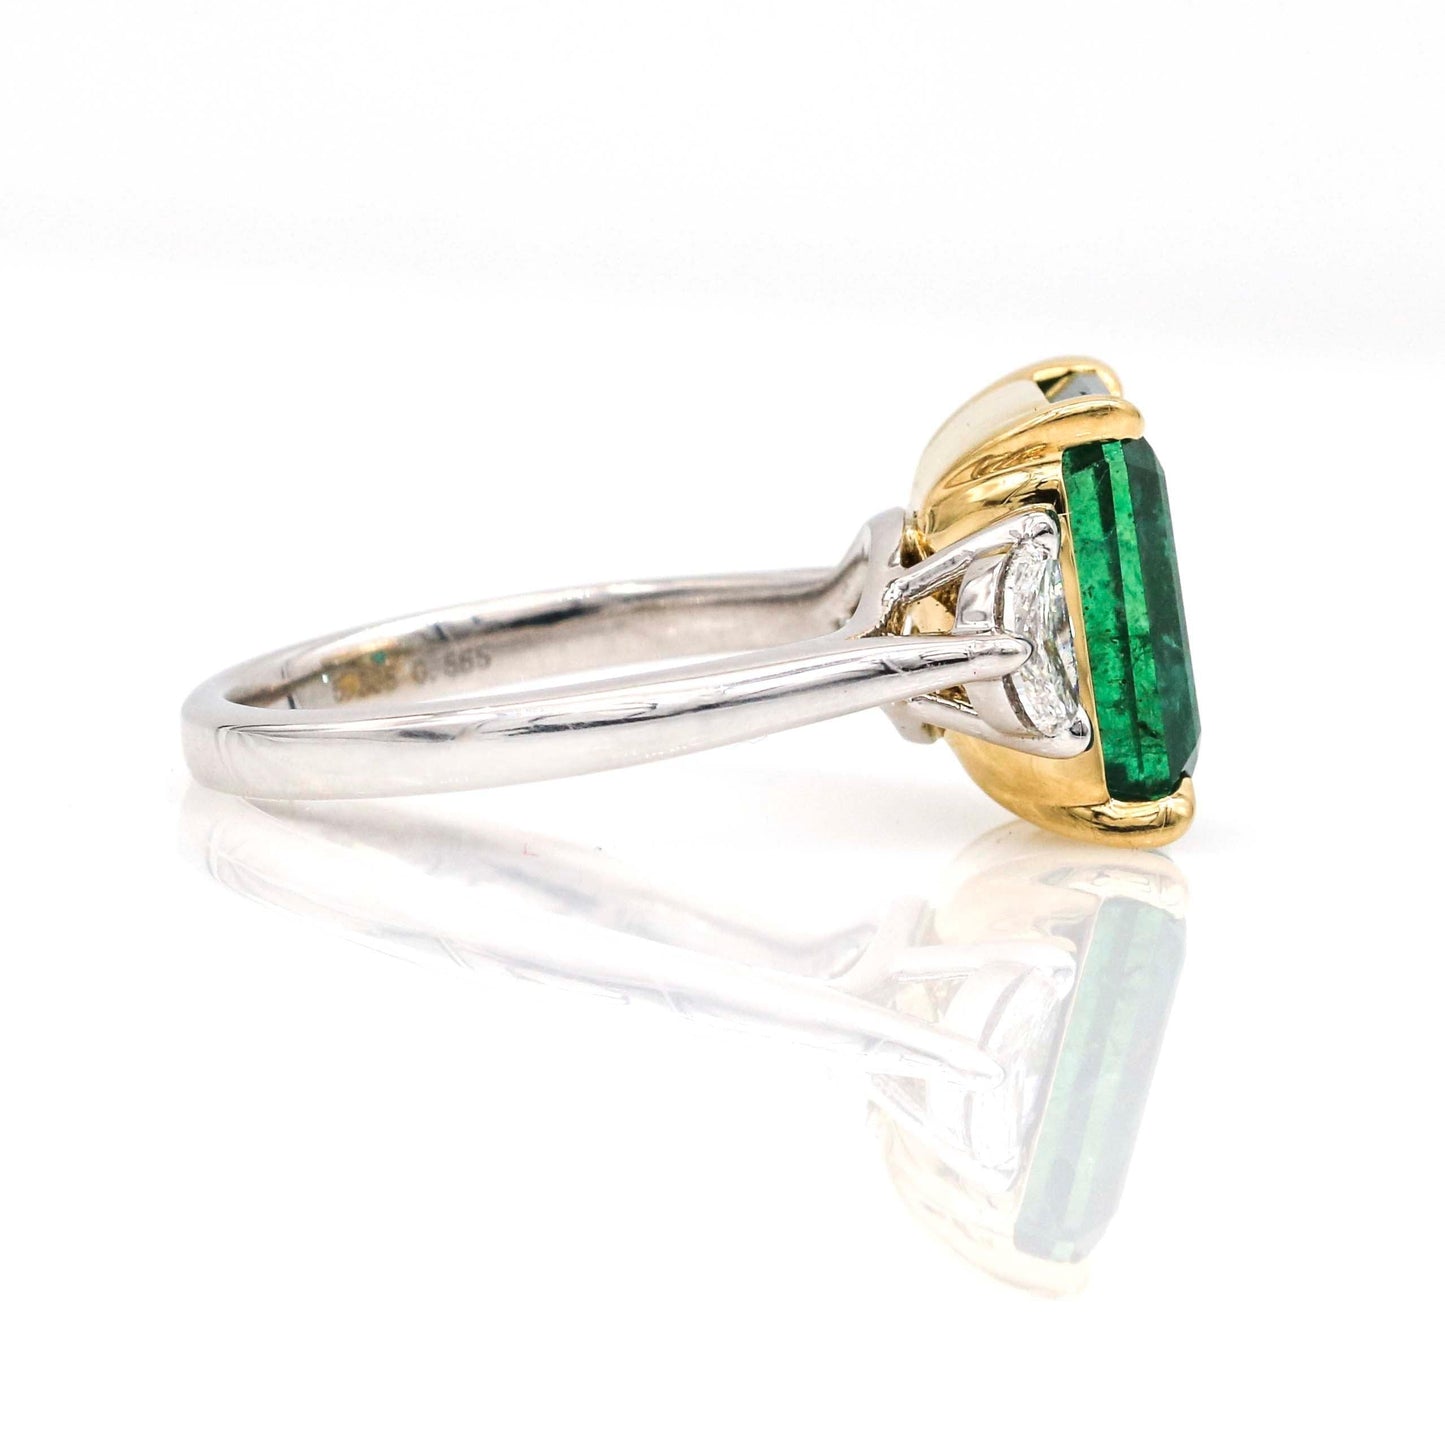 5.80 ct Emerald and Diamond Statement Ring in Platinum and 18k Yellow Gold - 31 Jewels Inc.